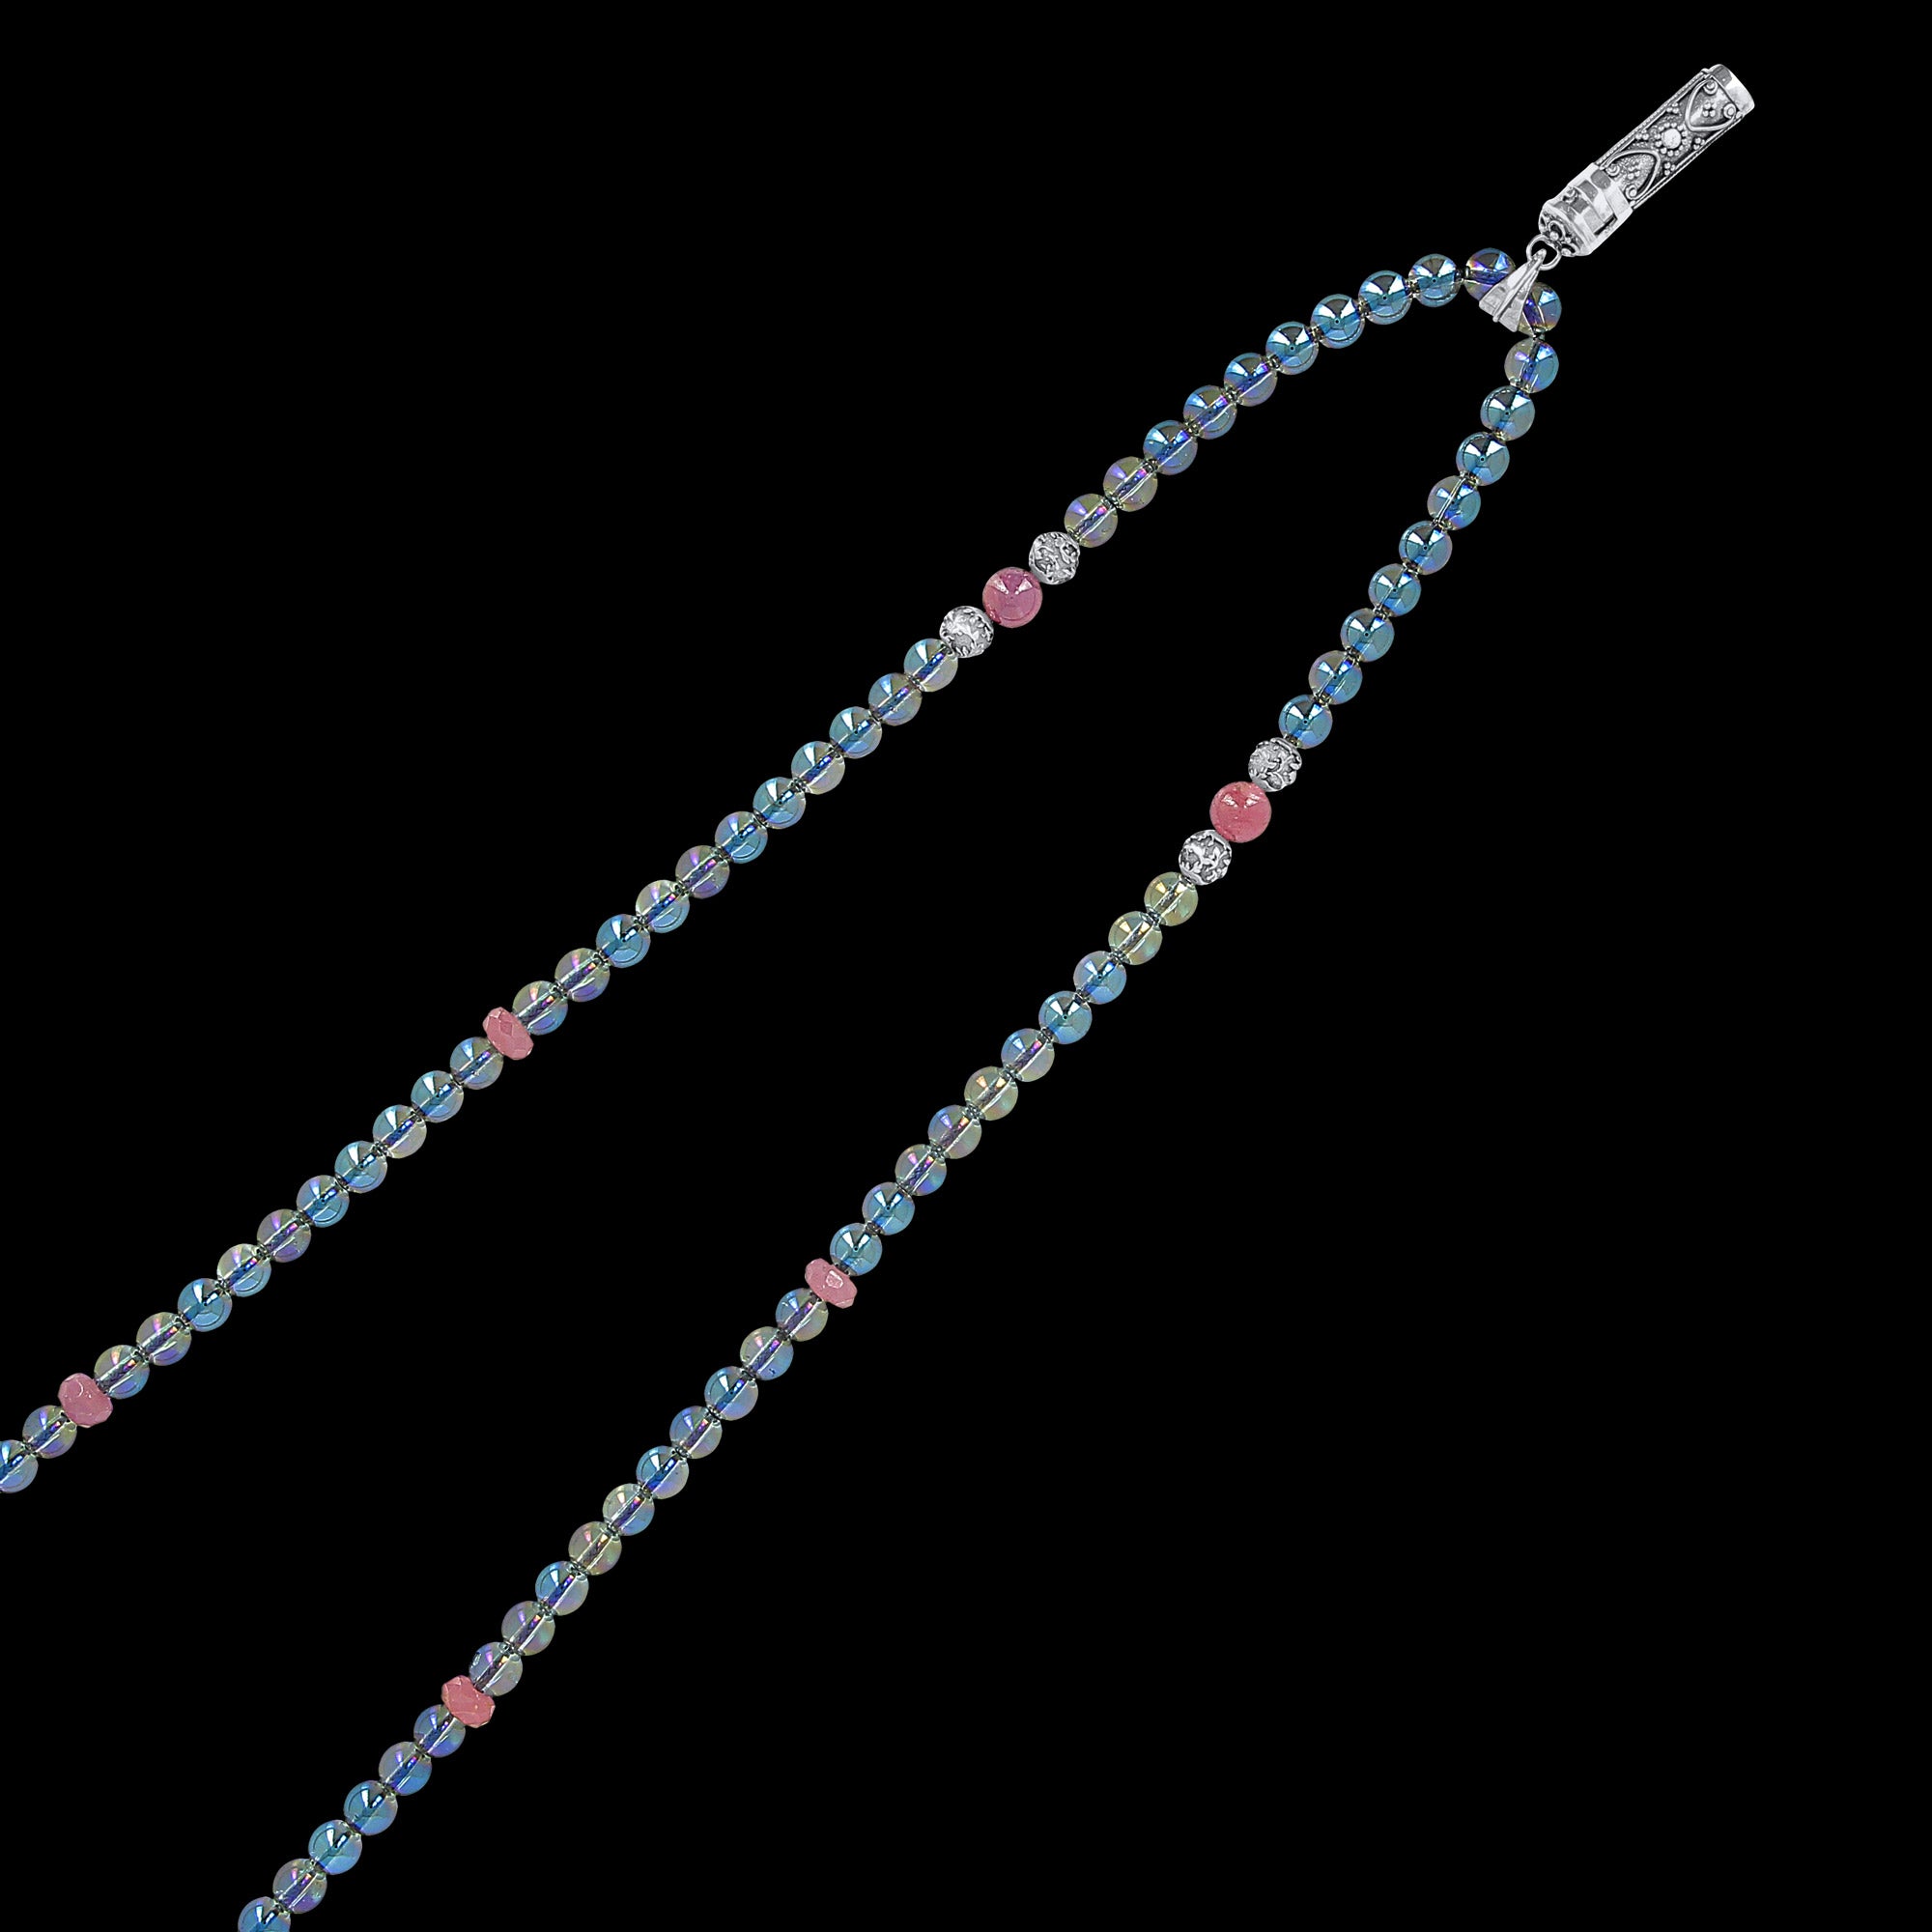 Parthenope - Long necklace in blue crystal quartz and rubies with prayer box